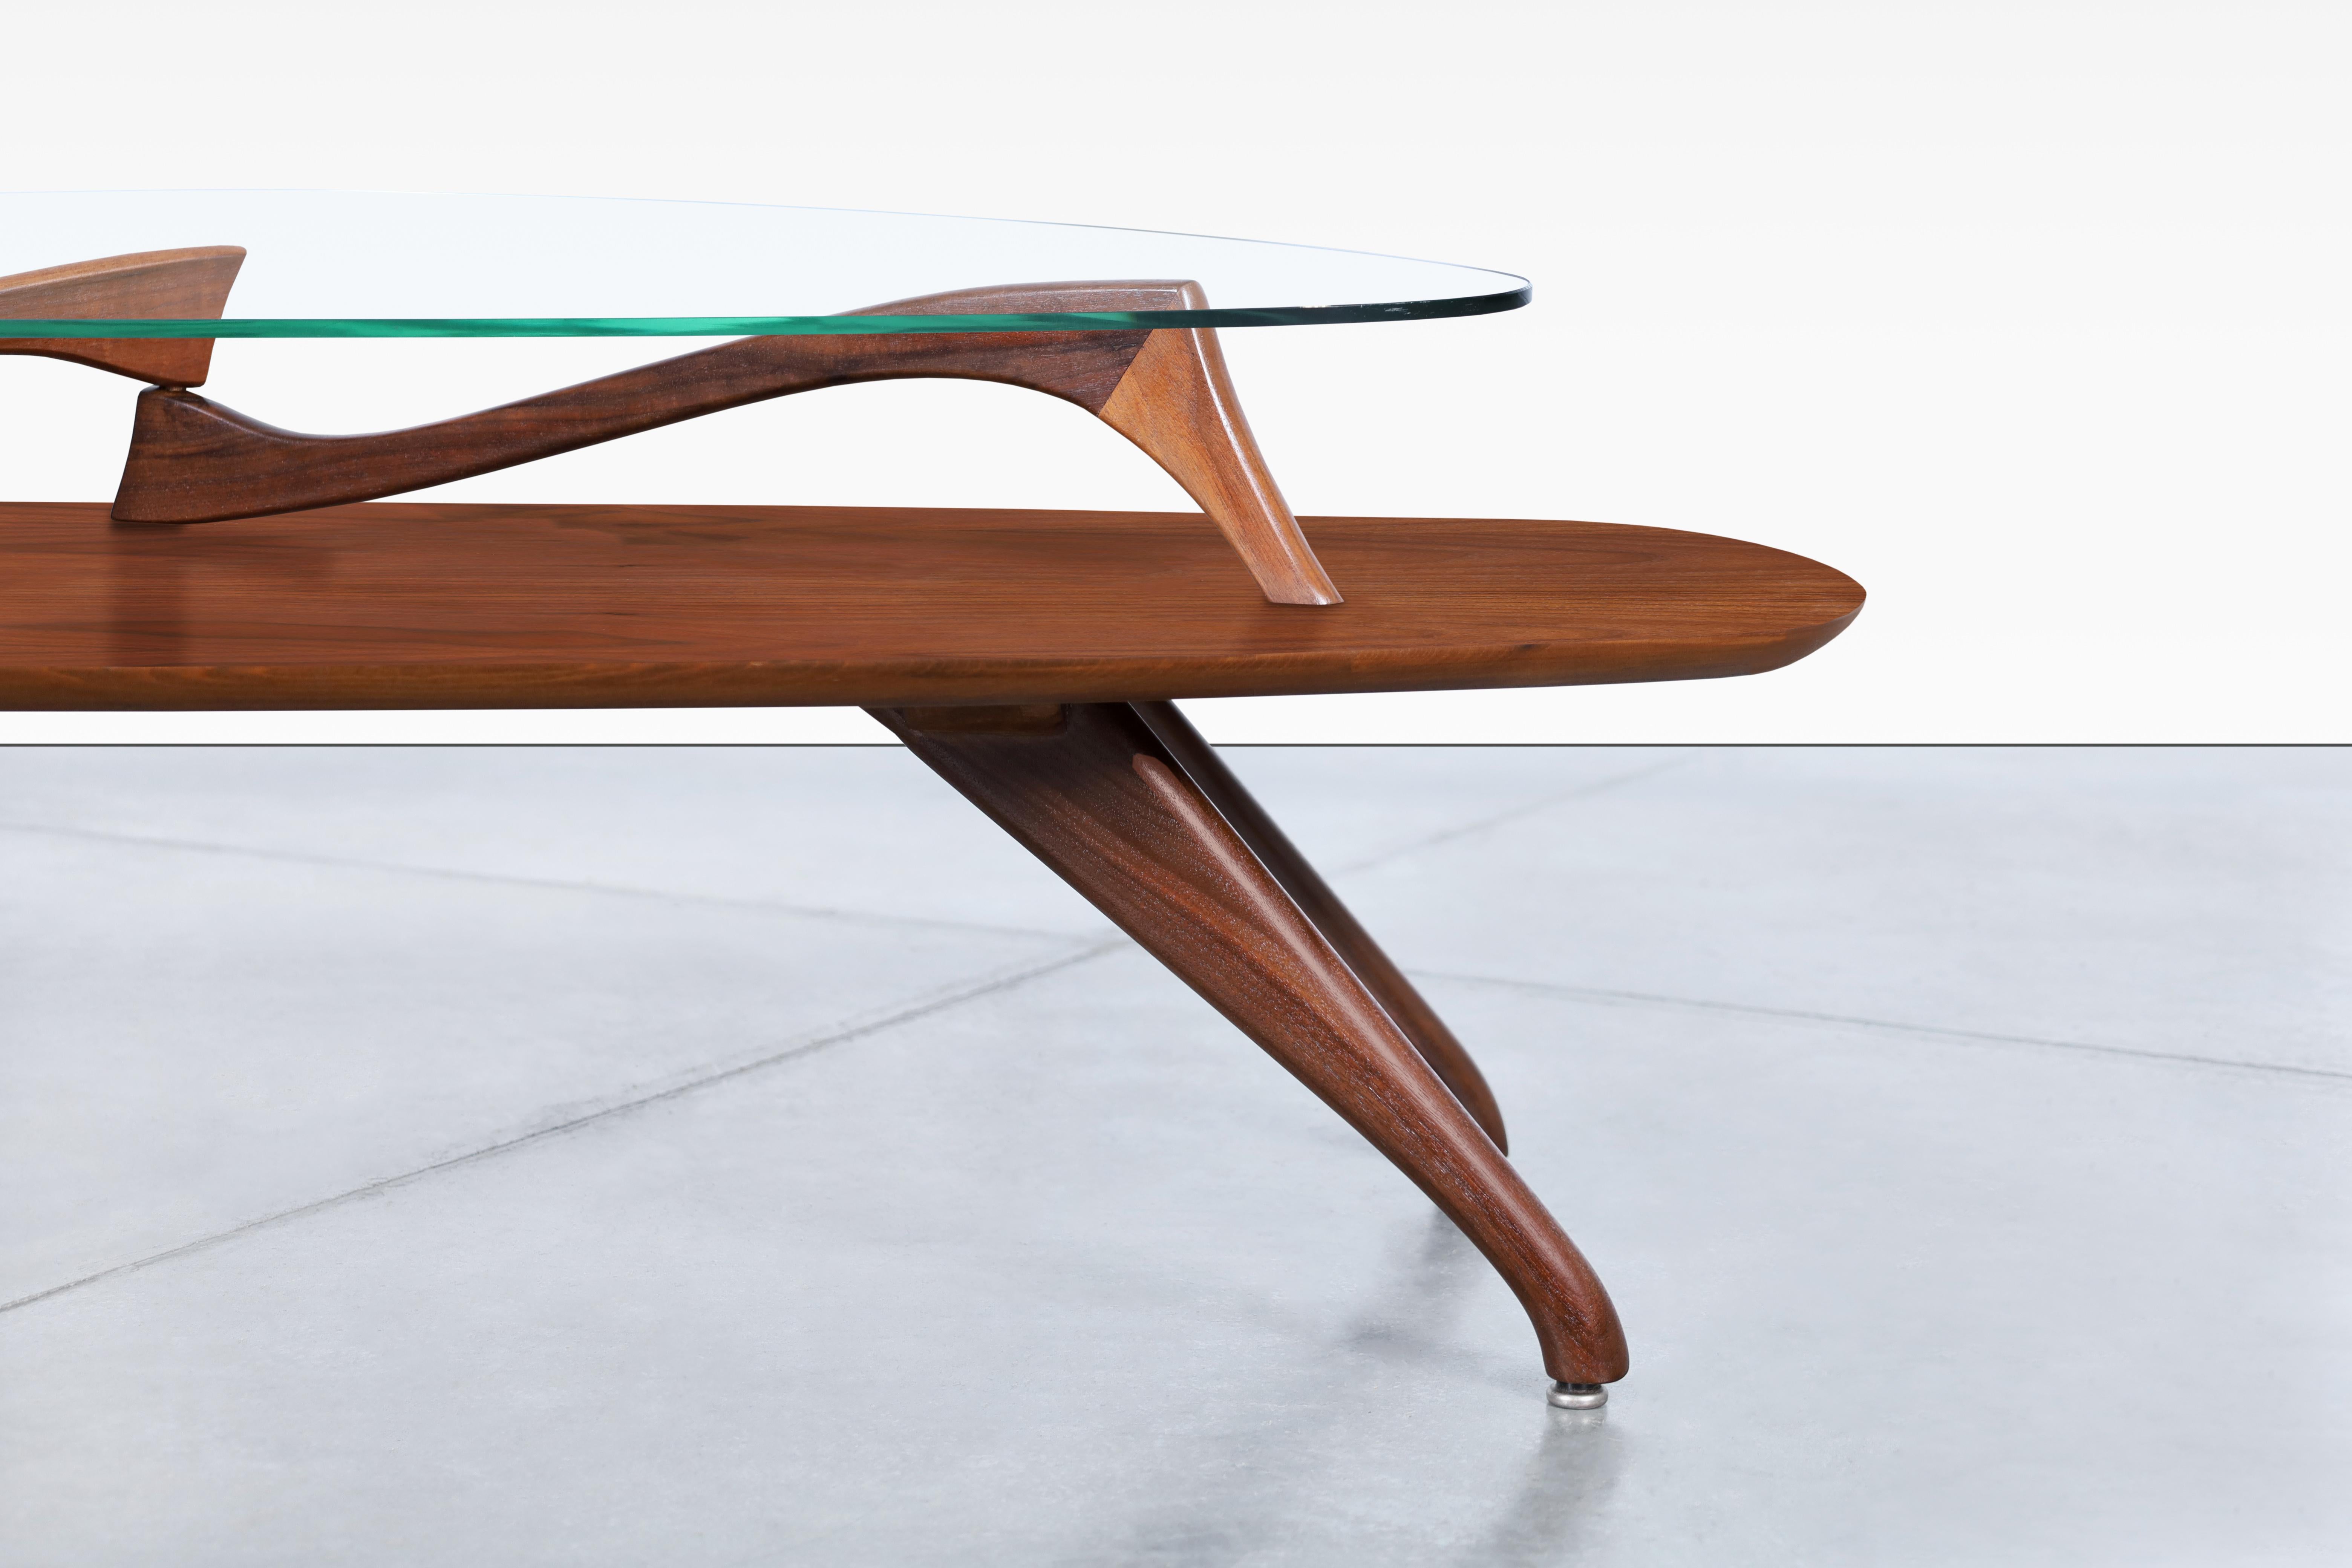 Vintage Sculptural Walnut Coffee Table Styled After Vladimir Kagan In Good Condition For Sale In North Hollywood, CA